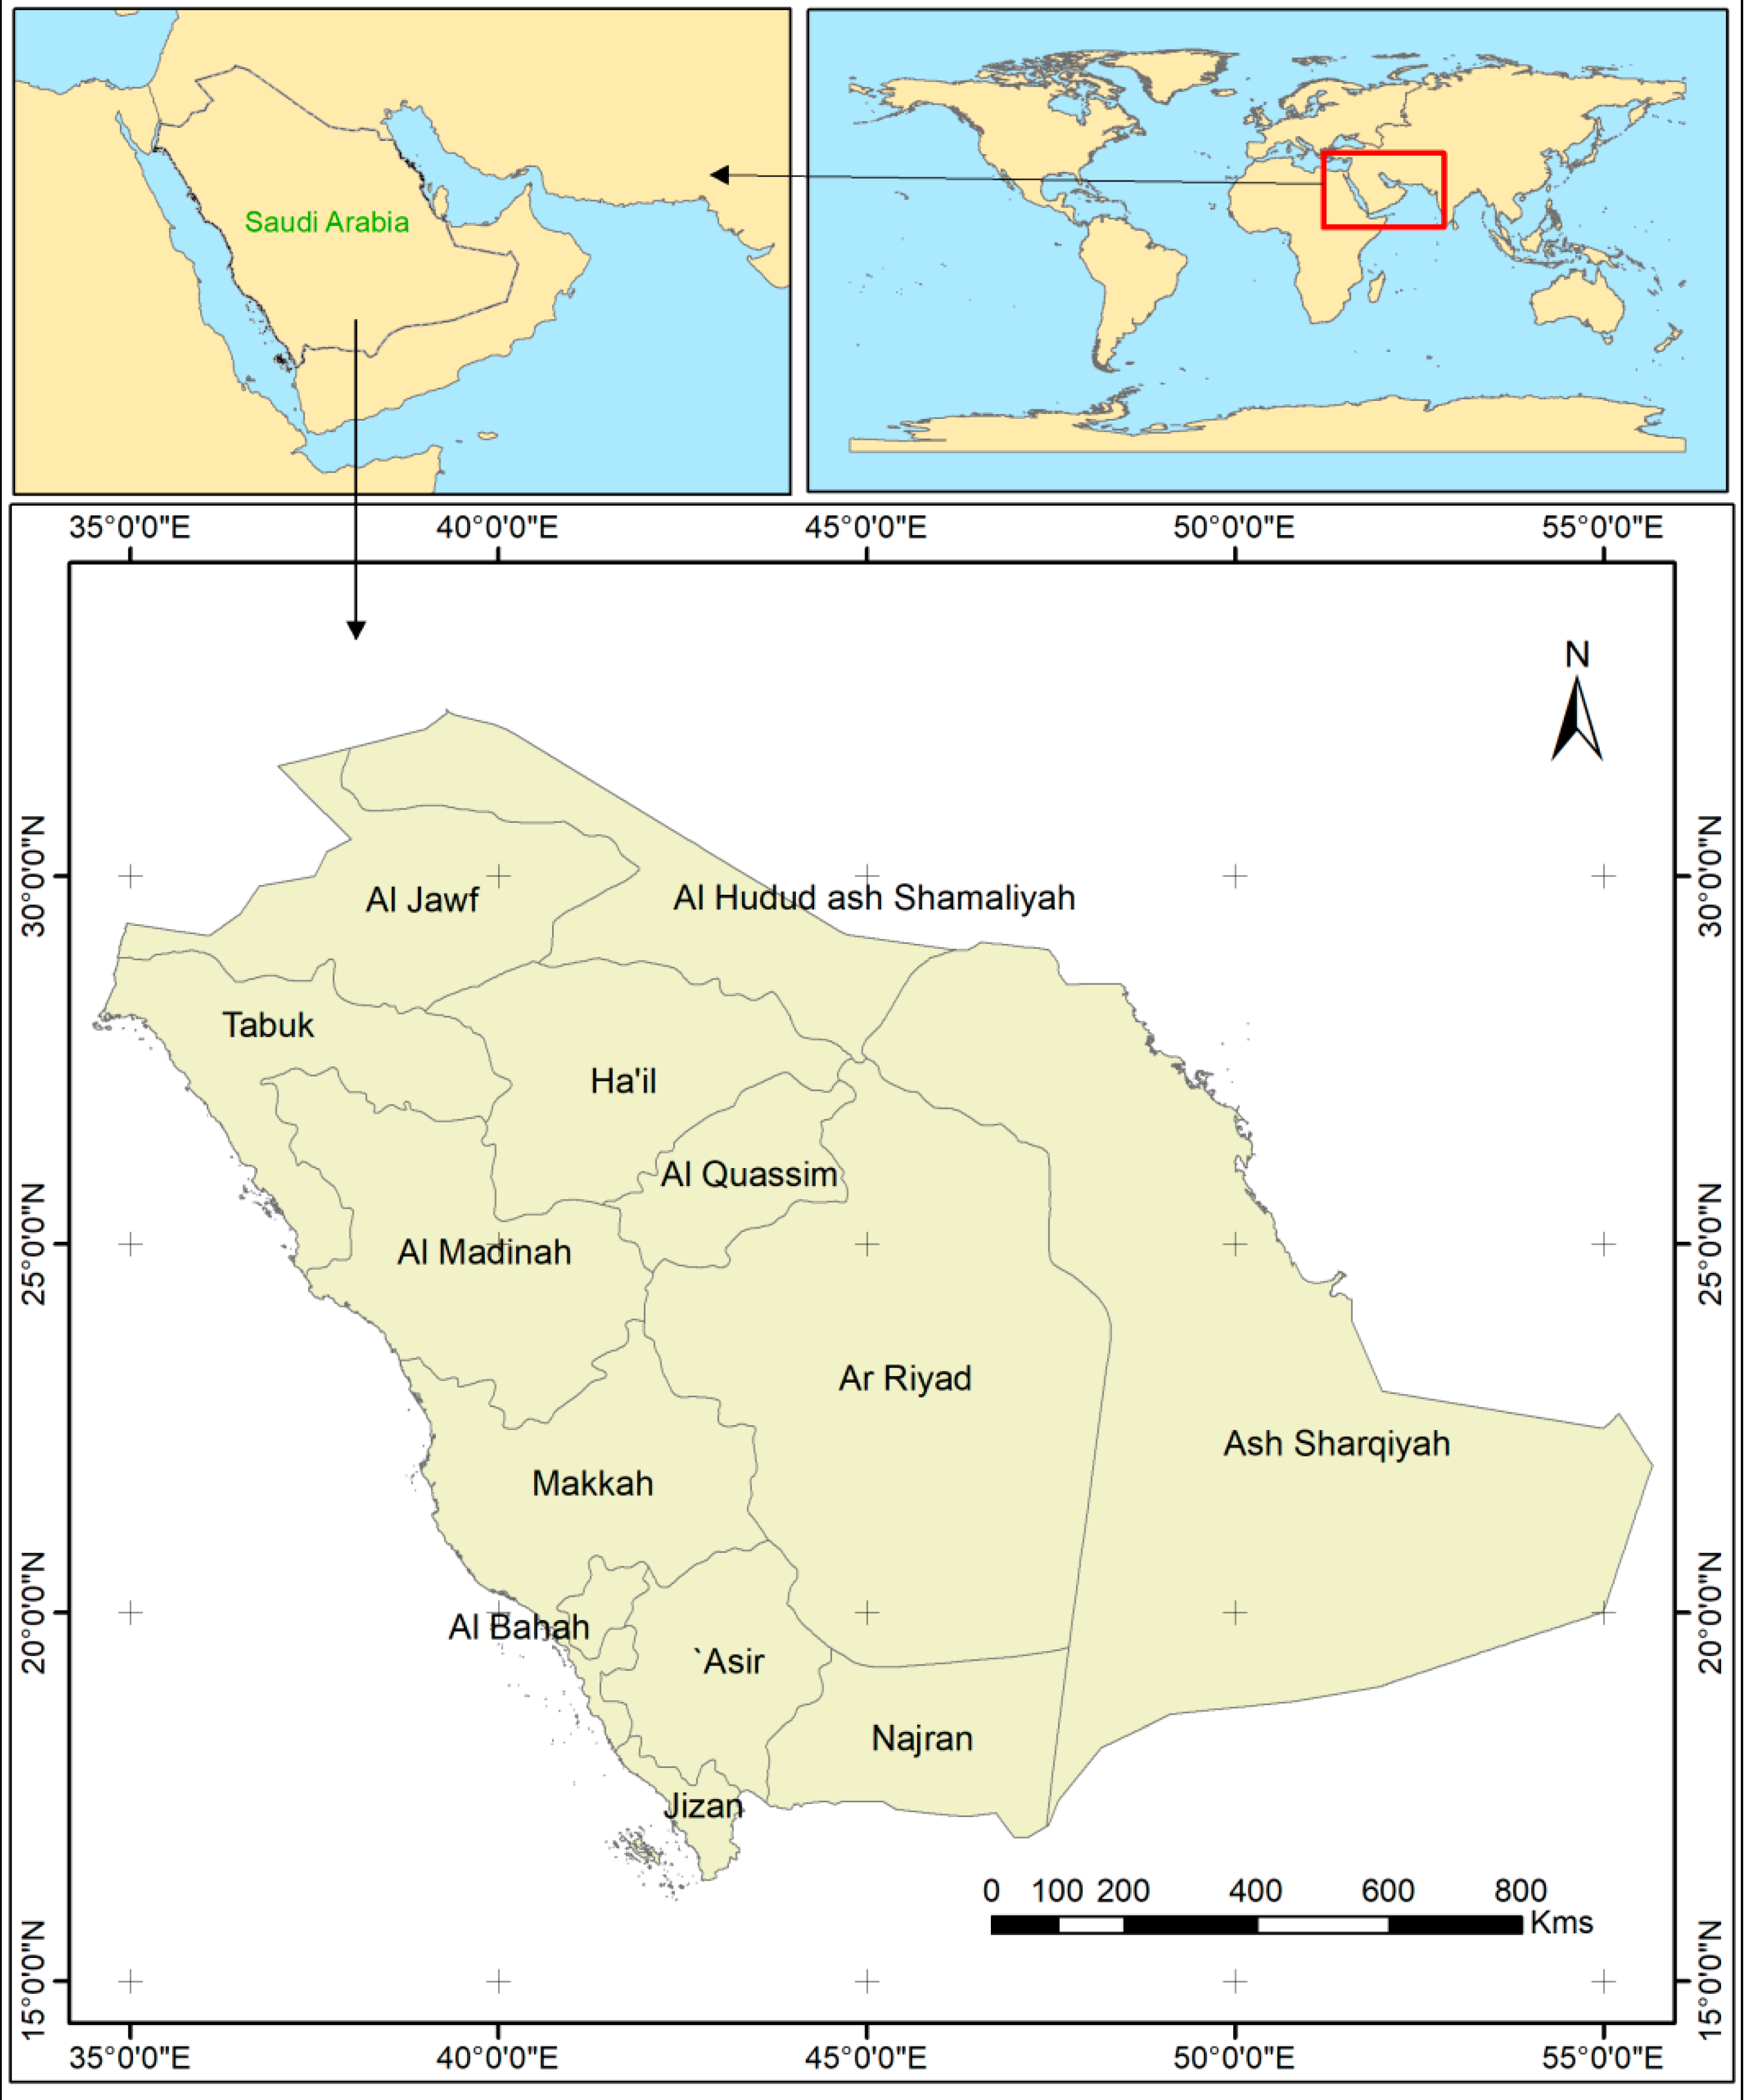 Water | Free Full-Text | Groundwater Quality Studies in the Kingdom of  Saudi Arabia: Prevalent Research and Management Dimensions | HTML